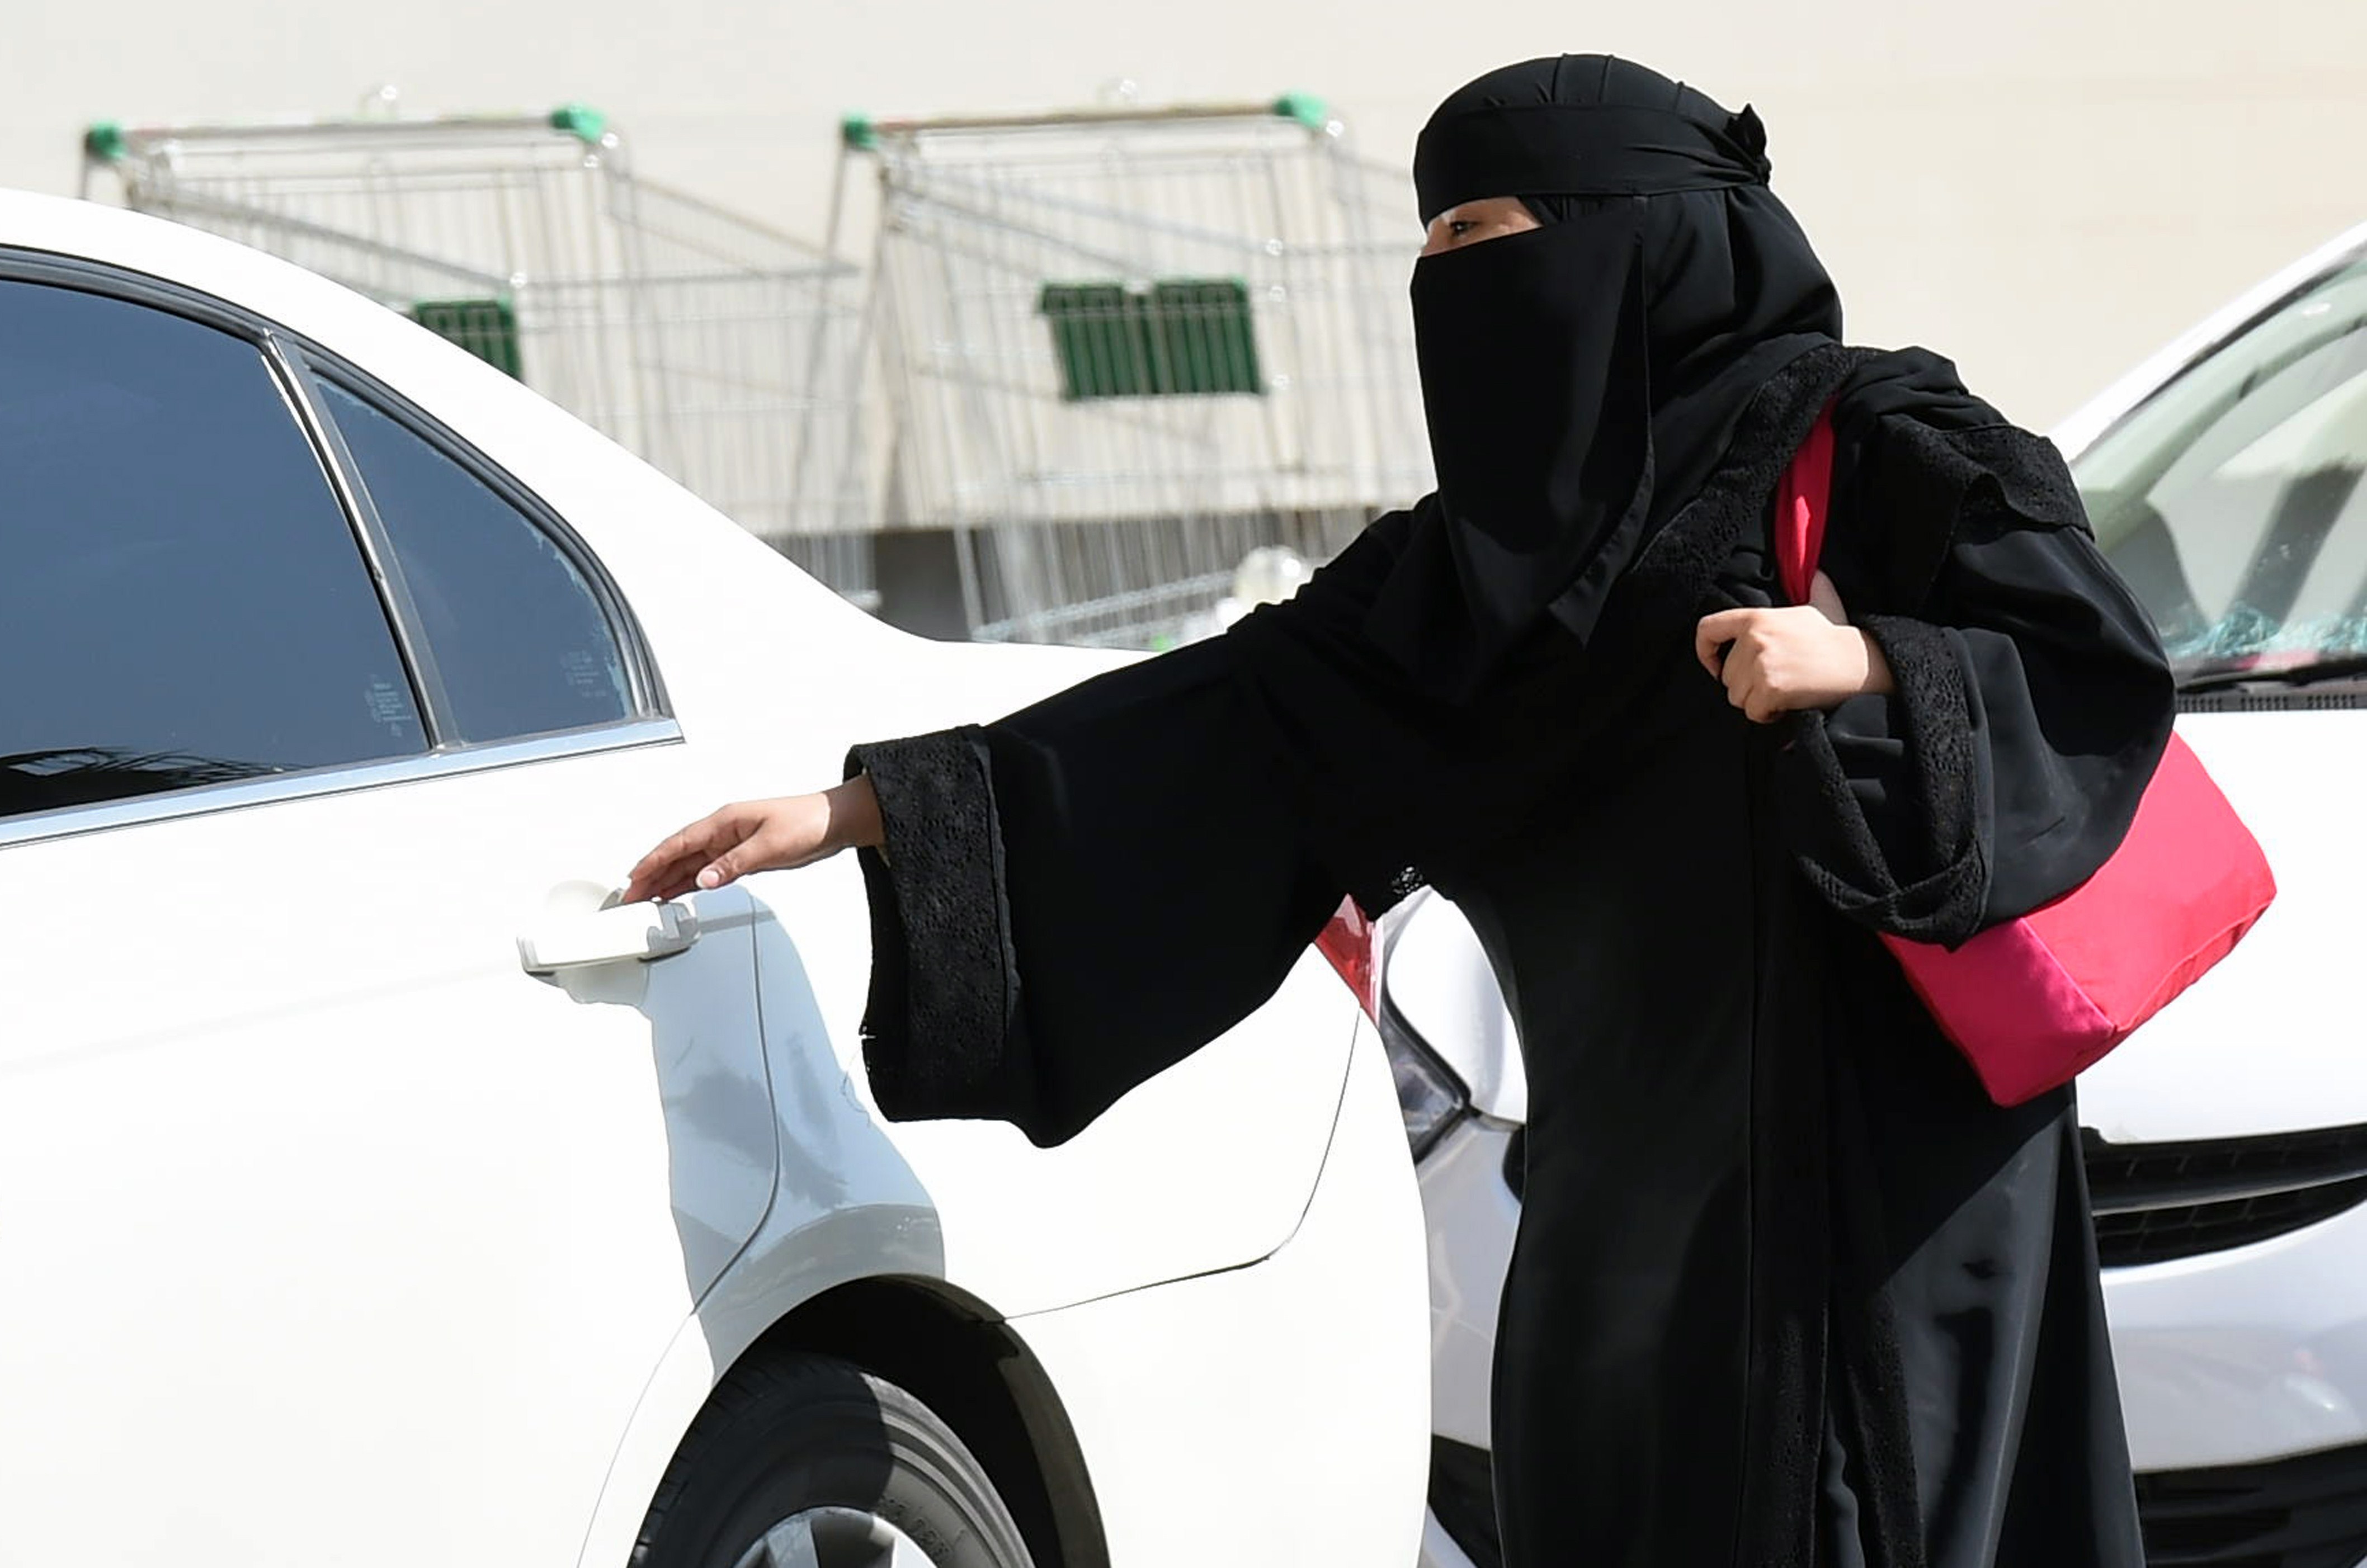 Saudi women who campaigned for the right to drive have been arrested.